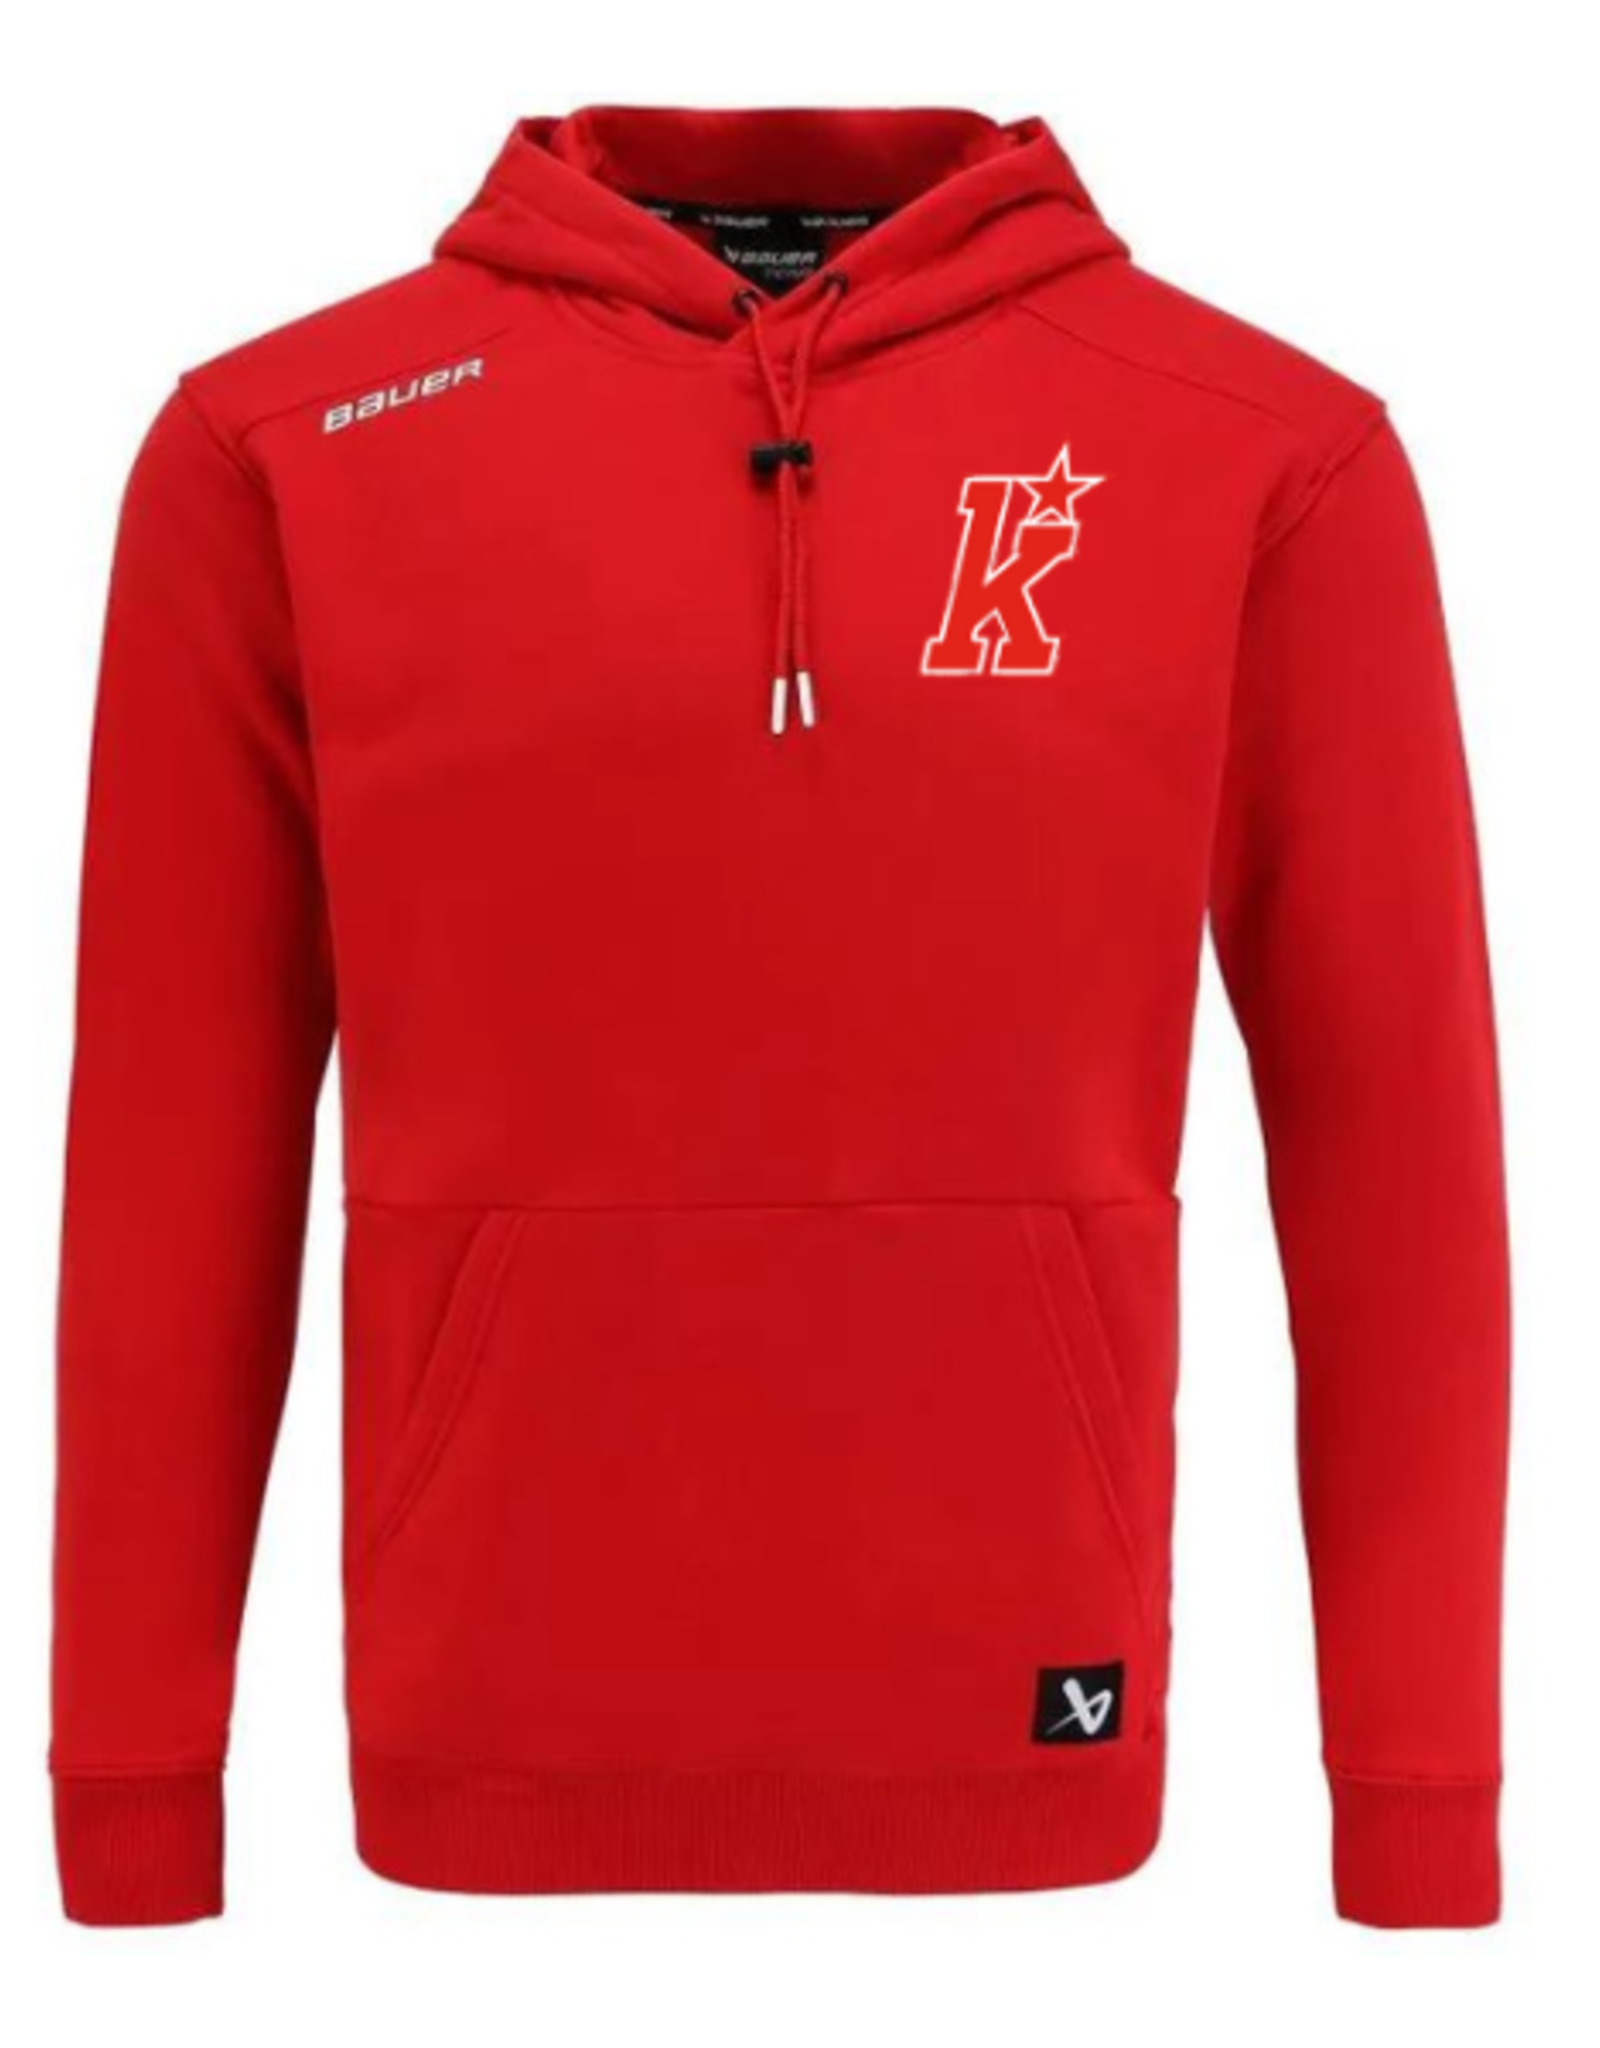 Bauer Kirkwood Bauer Ultimate Hoodie (YOUTH) RED